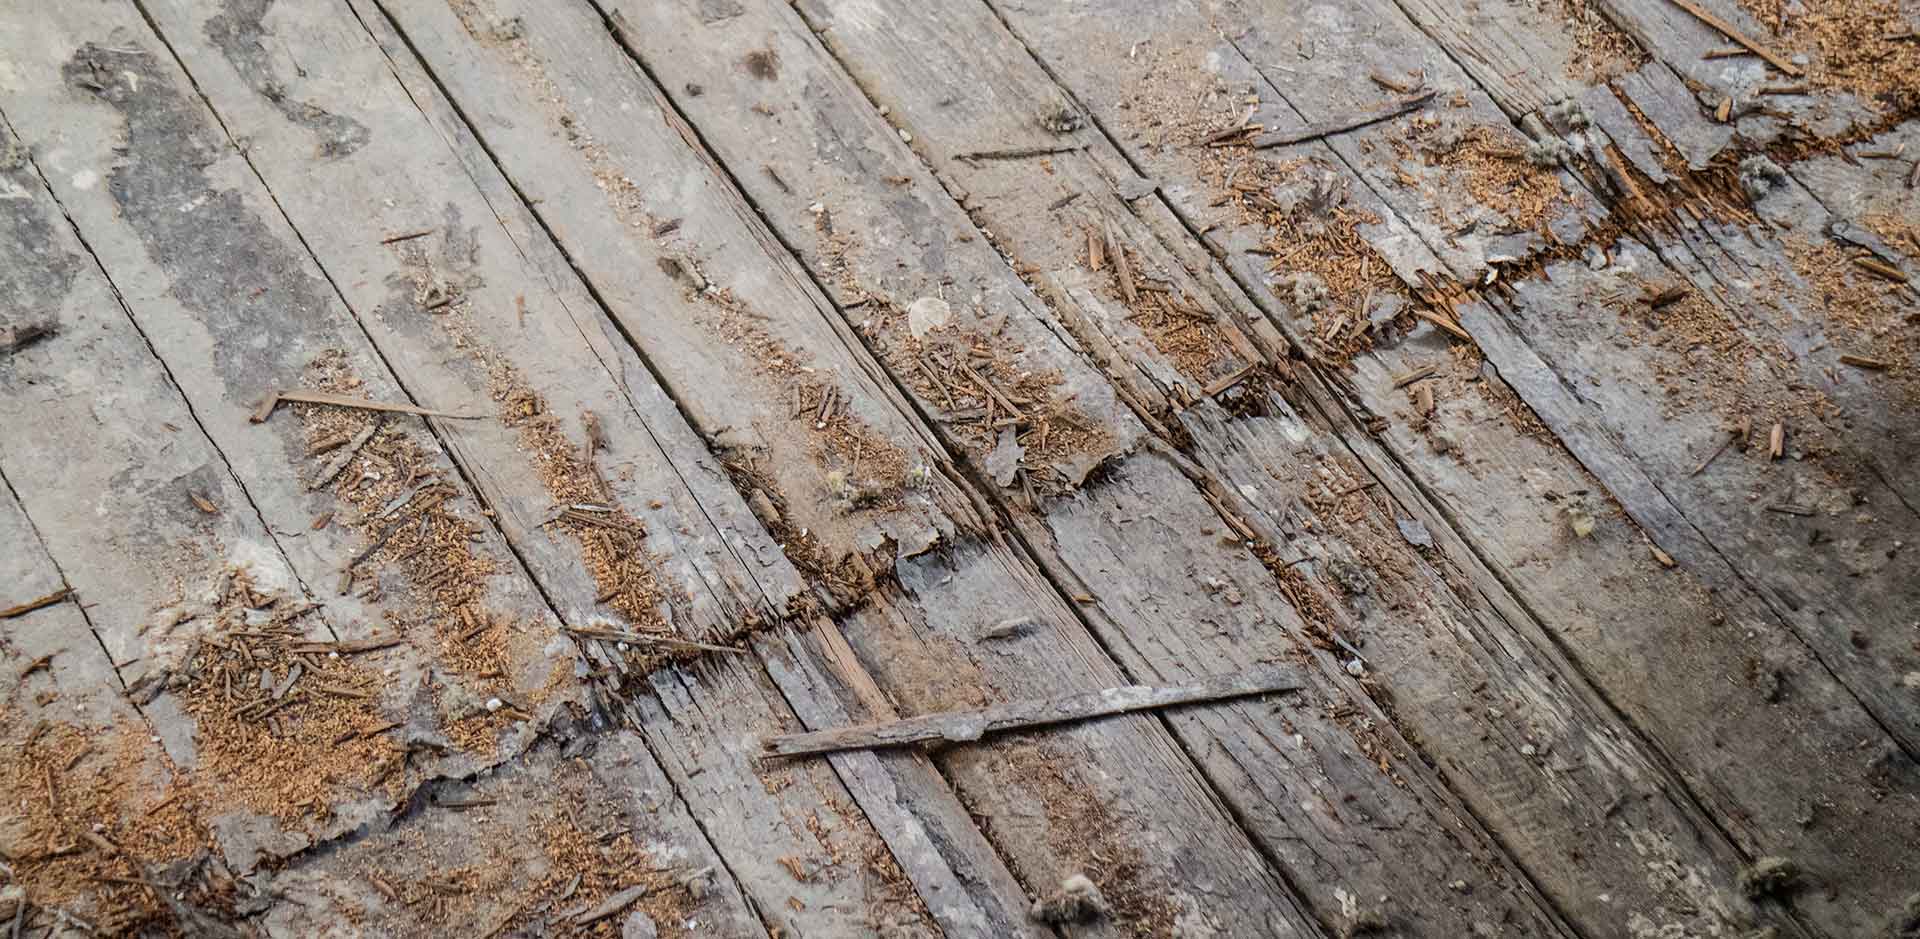 Deconstruction helps salvage tons of wood flooring and other materials